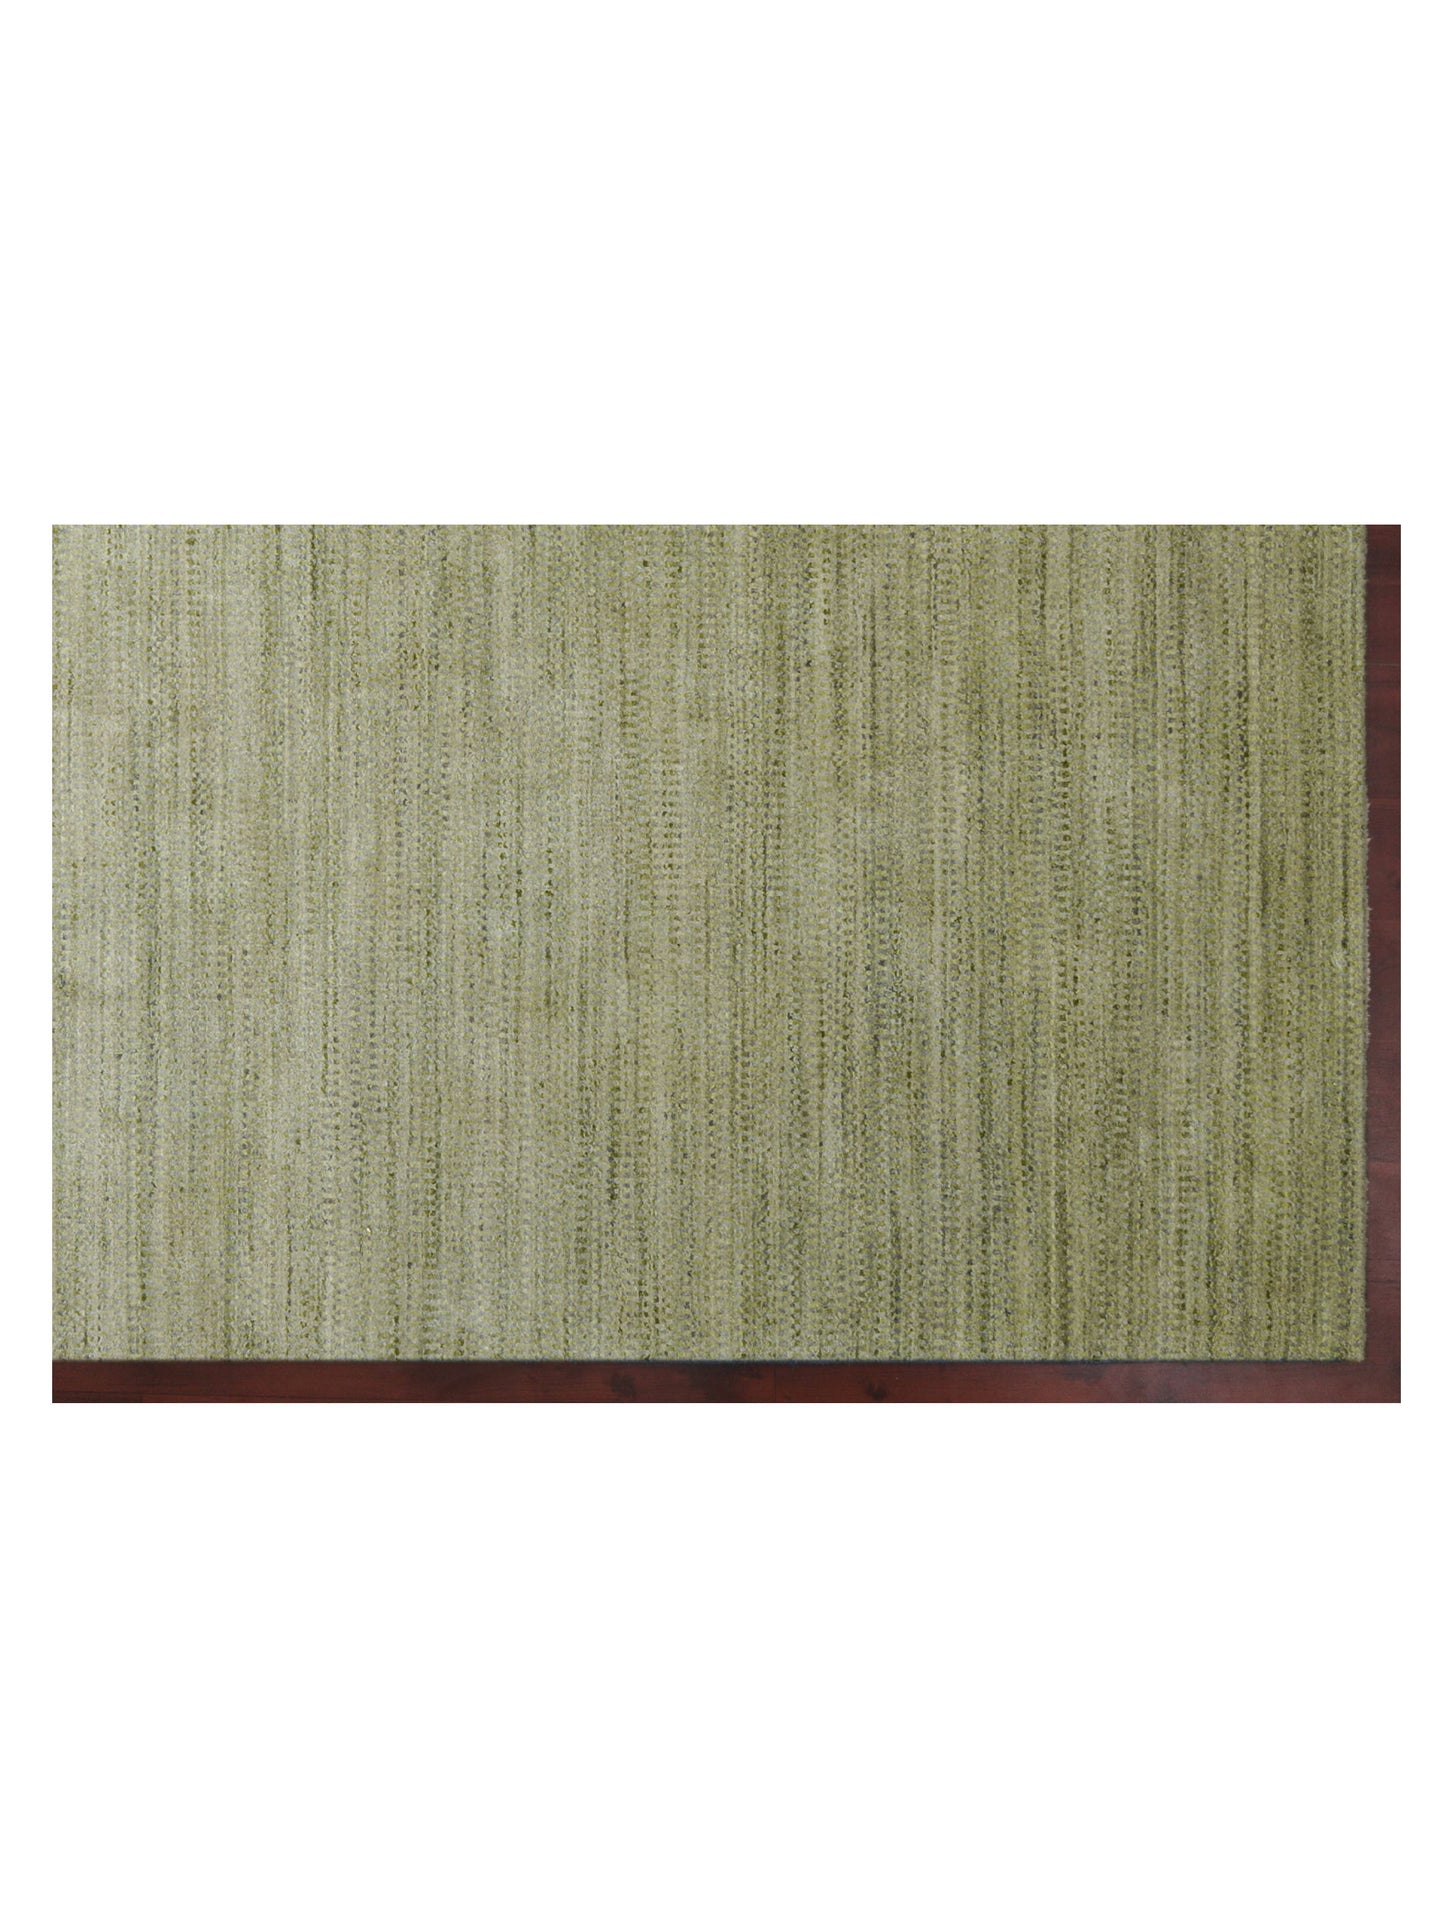 Limited REDCLIFFE RD-804 SAGE  Transitional Woven Rug